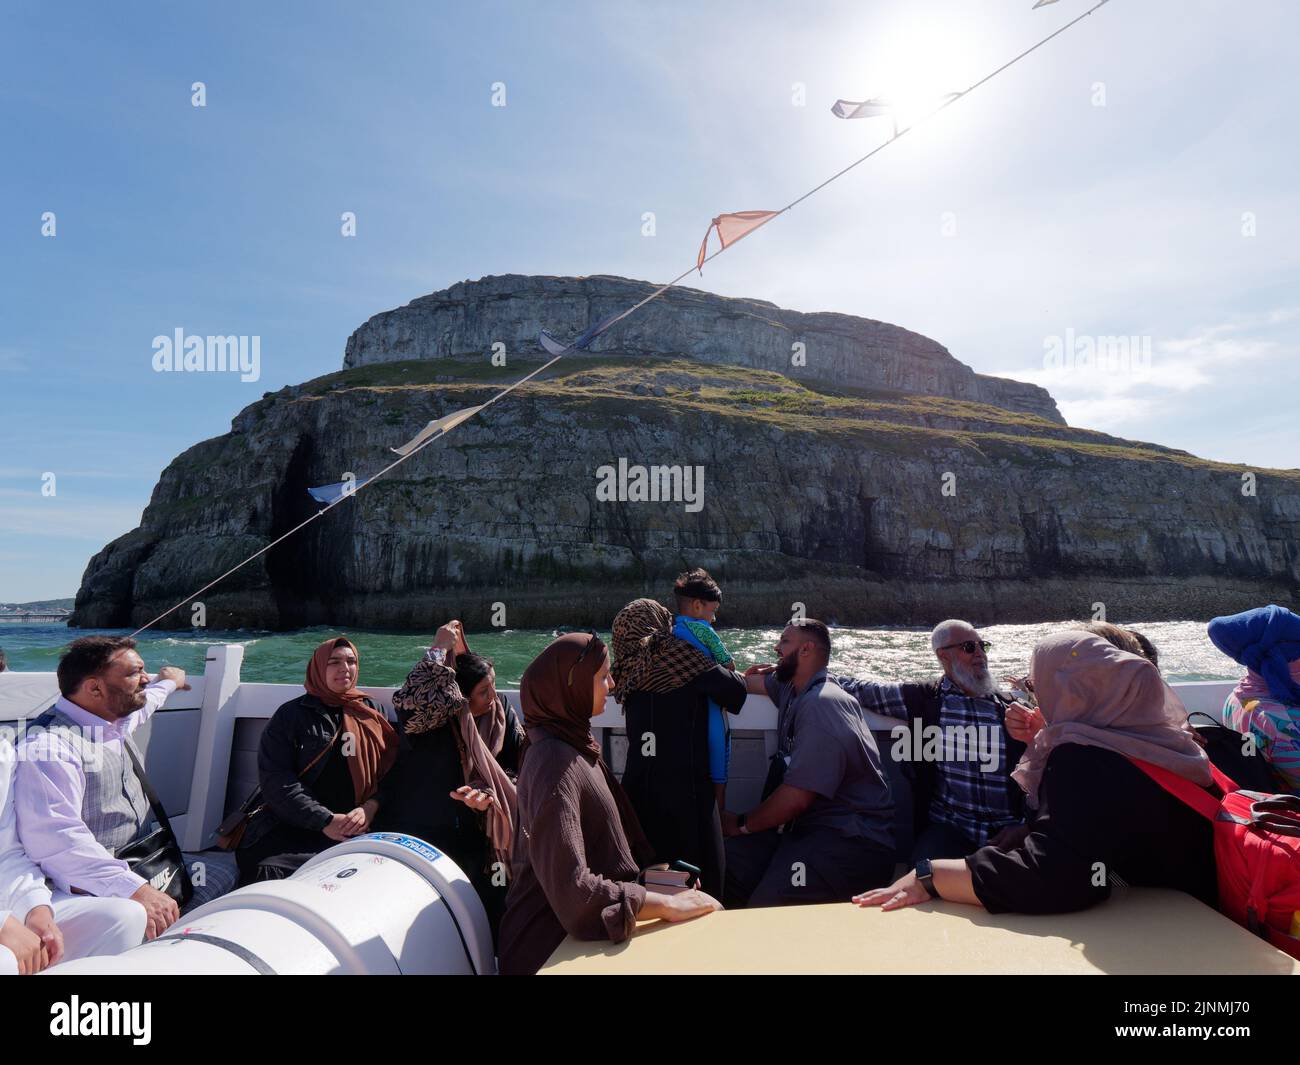 Llandudno, Clwyd, Wales, August 07 2022: People enjoying a boat trip with the Great Orme in the background. Stock Photo